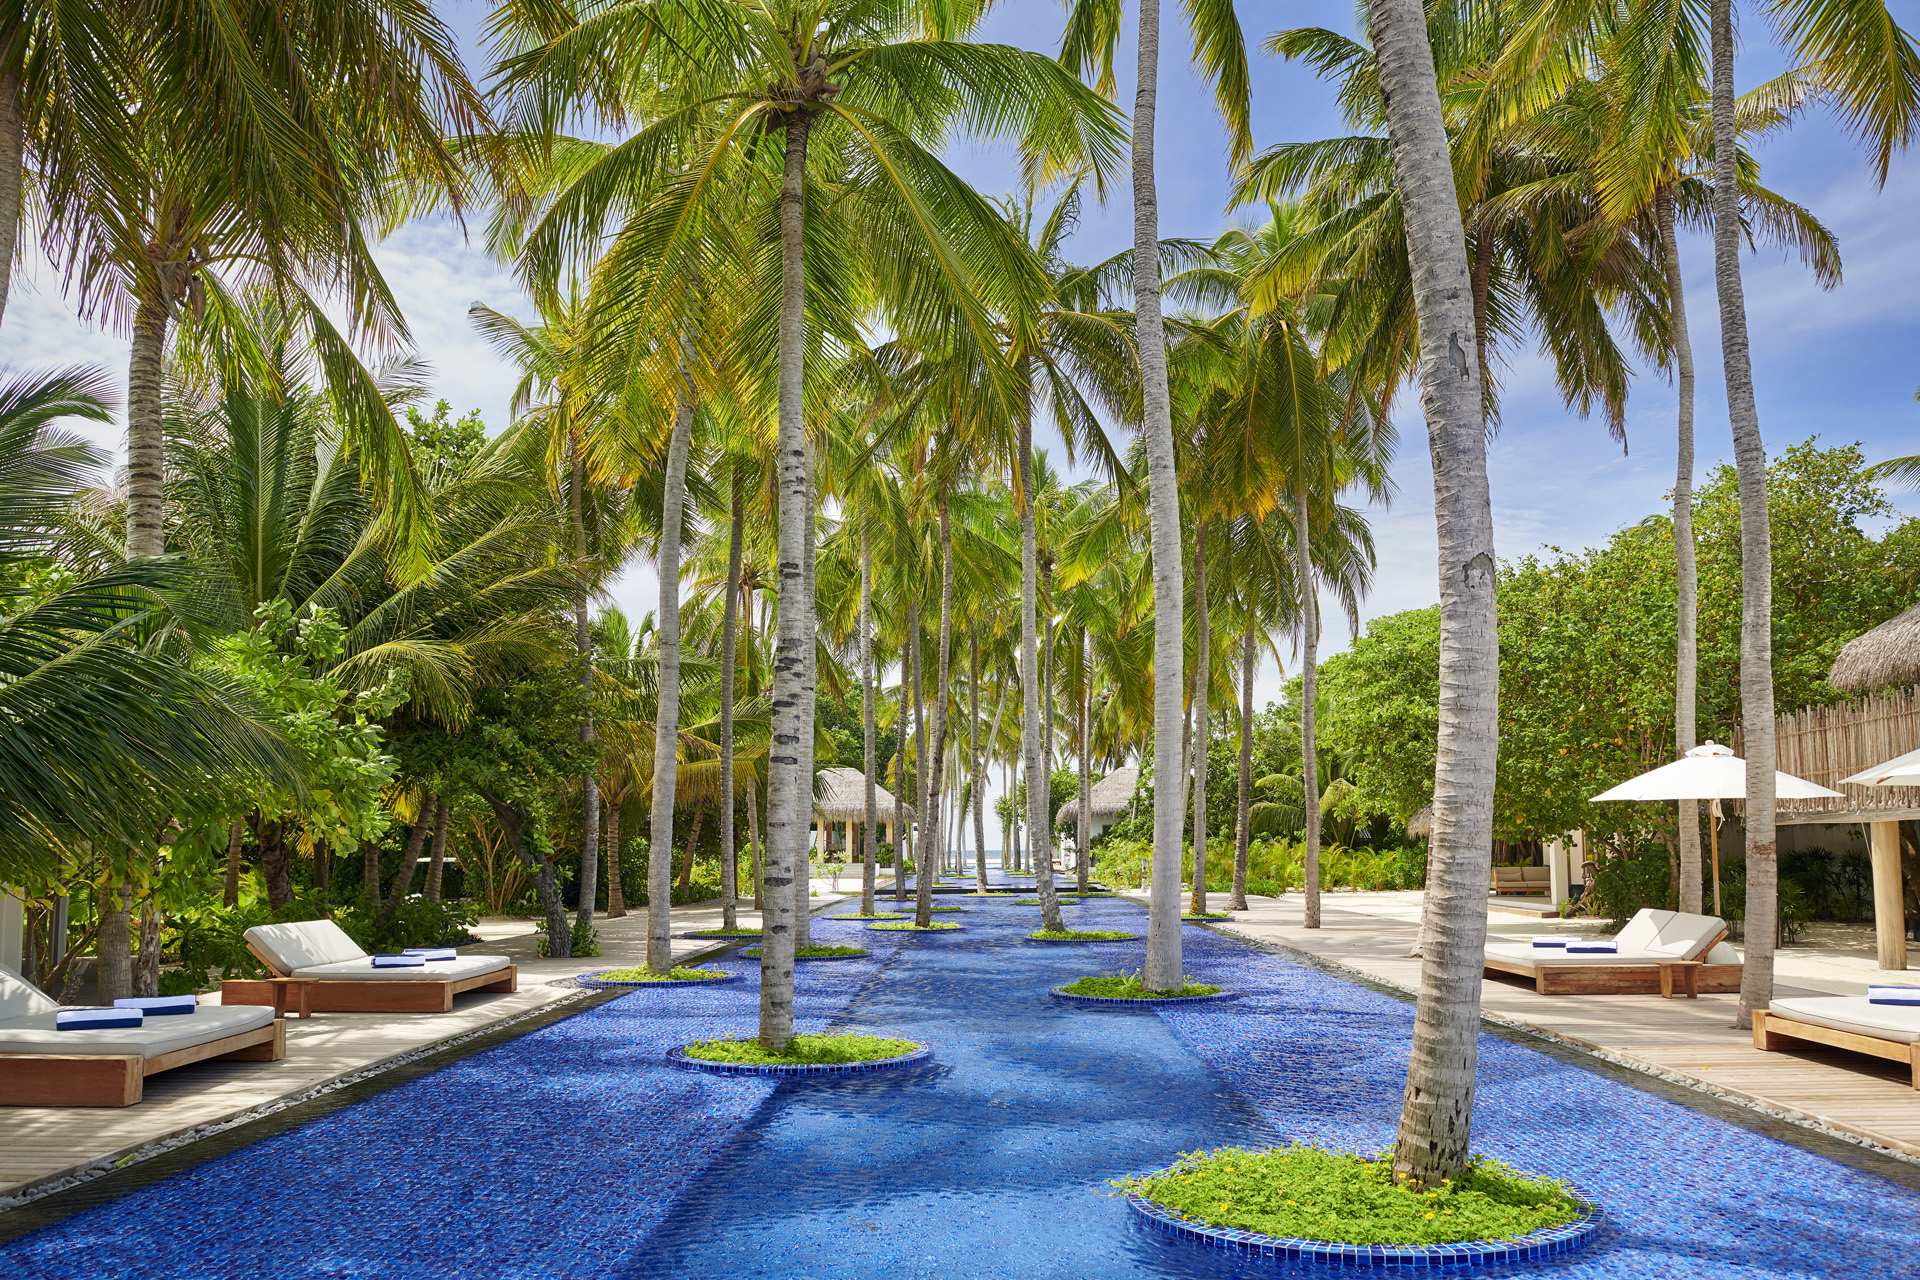 An infinity pool interspersed with tall palm trees